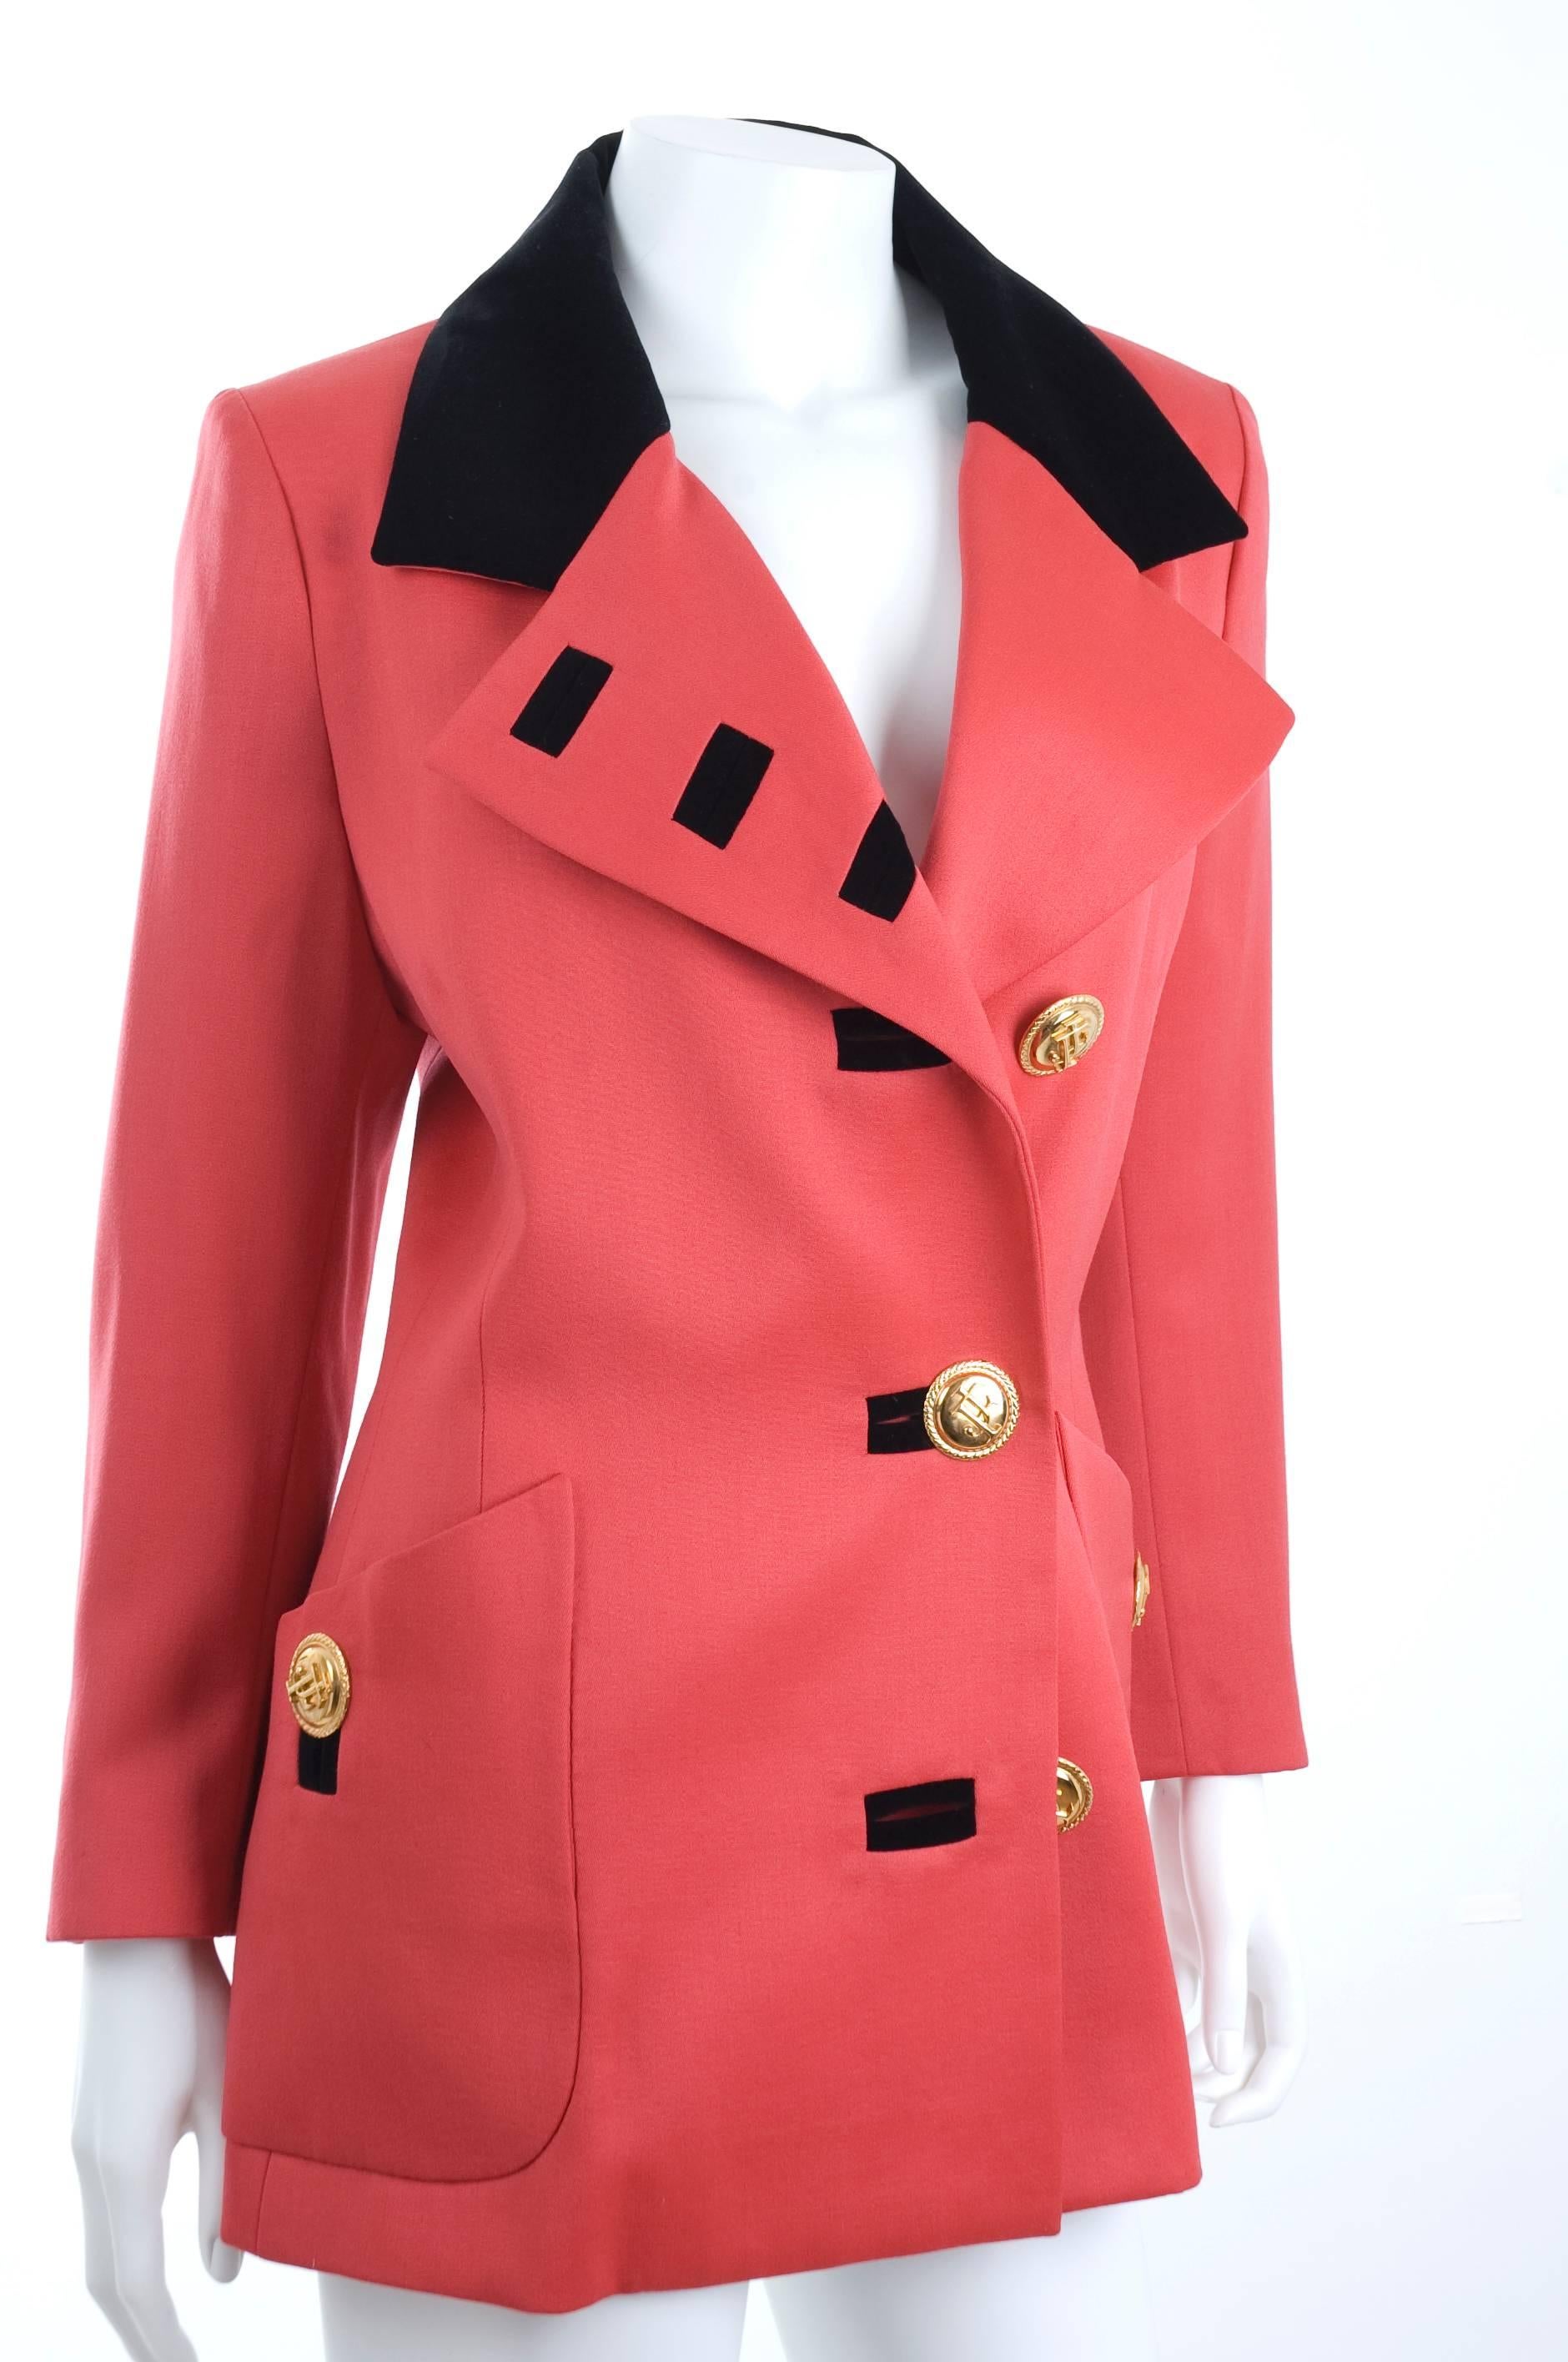 Jaques Fath Jacket in lipstick red and black velvet details. Gold tone Buttons
In excellent condition - no flaws to mention.
-- The Fath design house closed in 1957 and relaunched by the France Luxury Group in 1992. This Jacket is from that